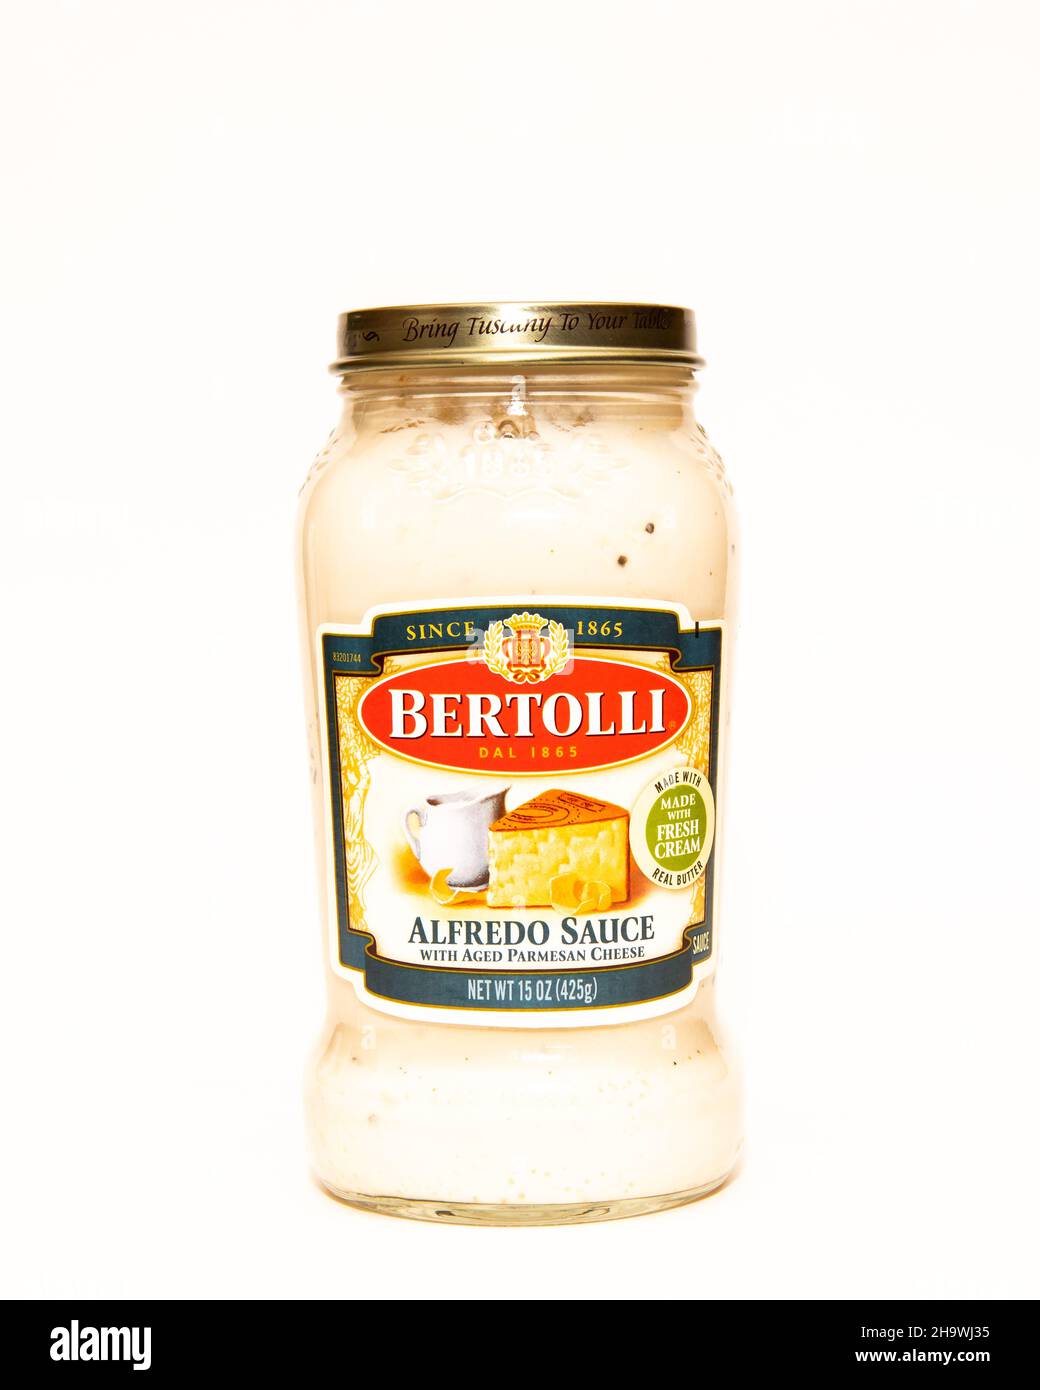 A jar of Bertolli Alfredo Sauce with aged Parmesan Cheese, isolated on white Stock Photo